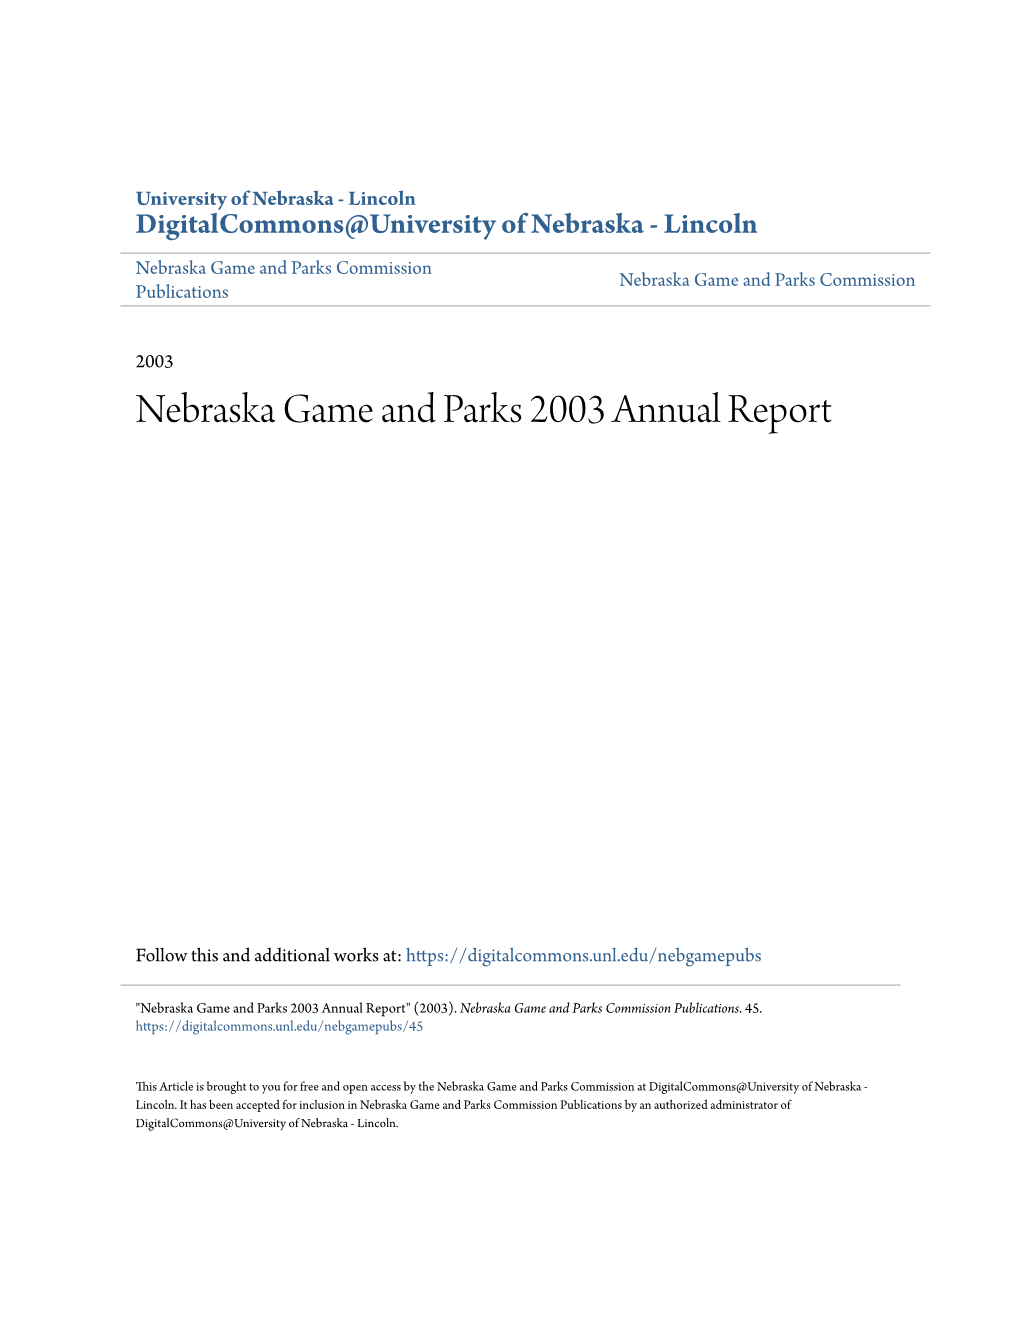 Nebraska Game and Parks 2003 Annual Report